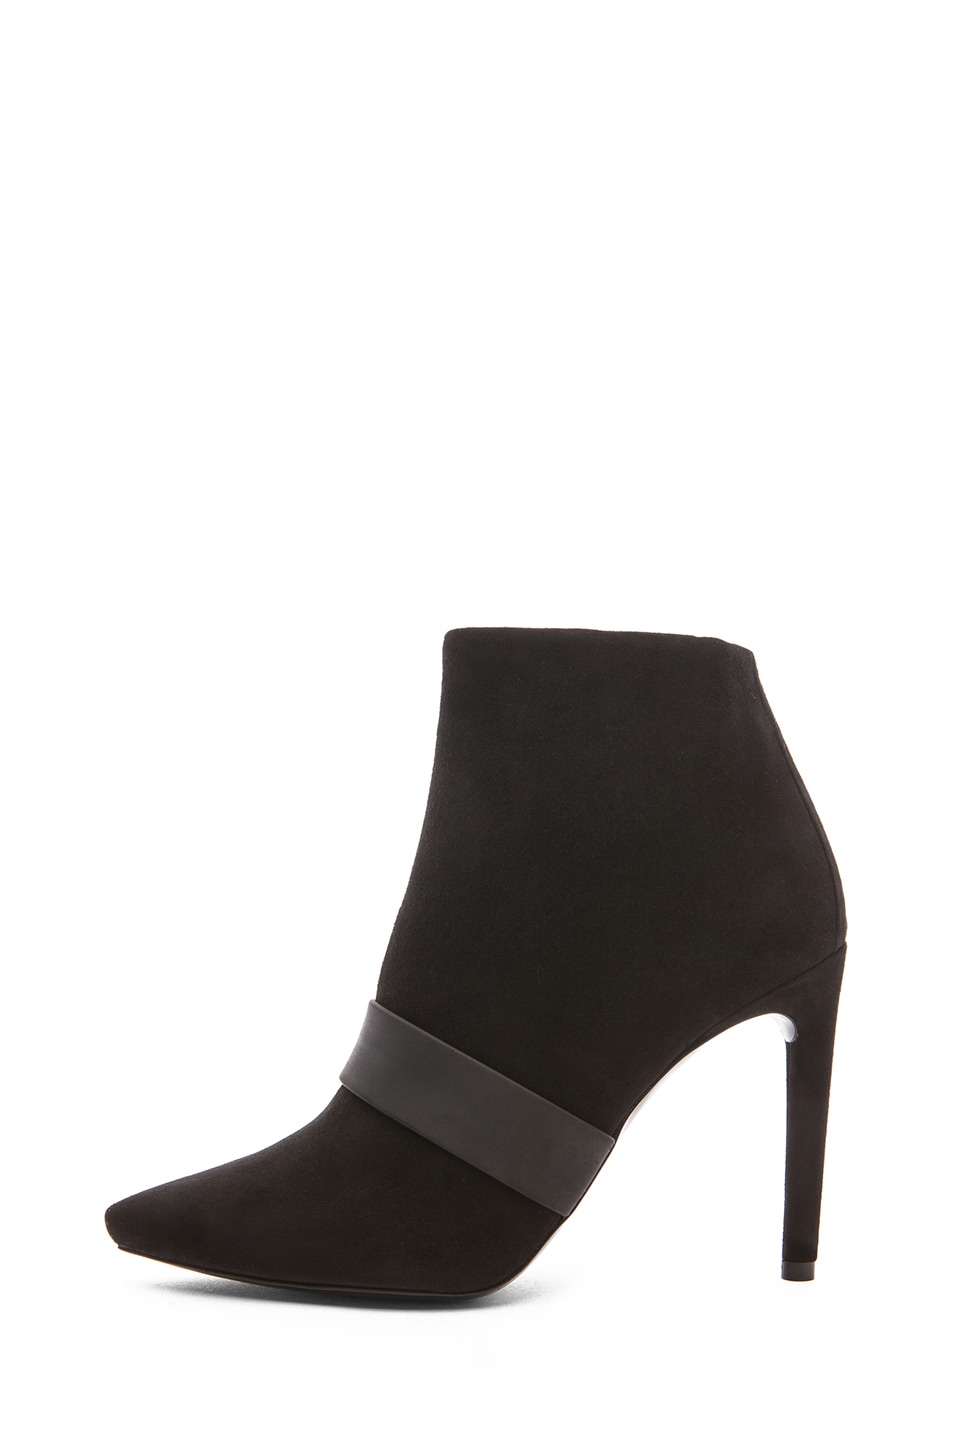 Image 1 of Proenza Schouler Suede Ankle Boots in Black Suede